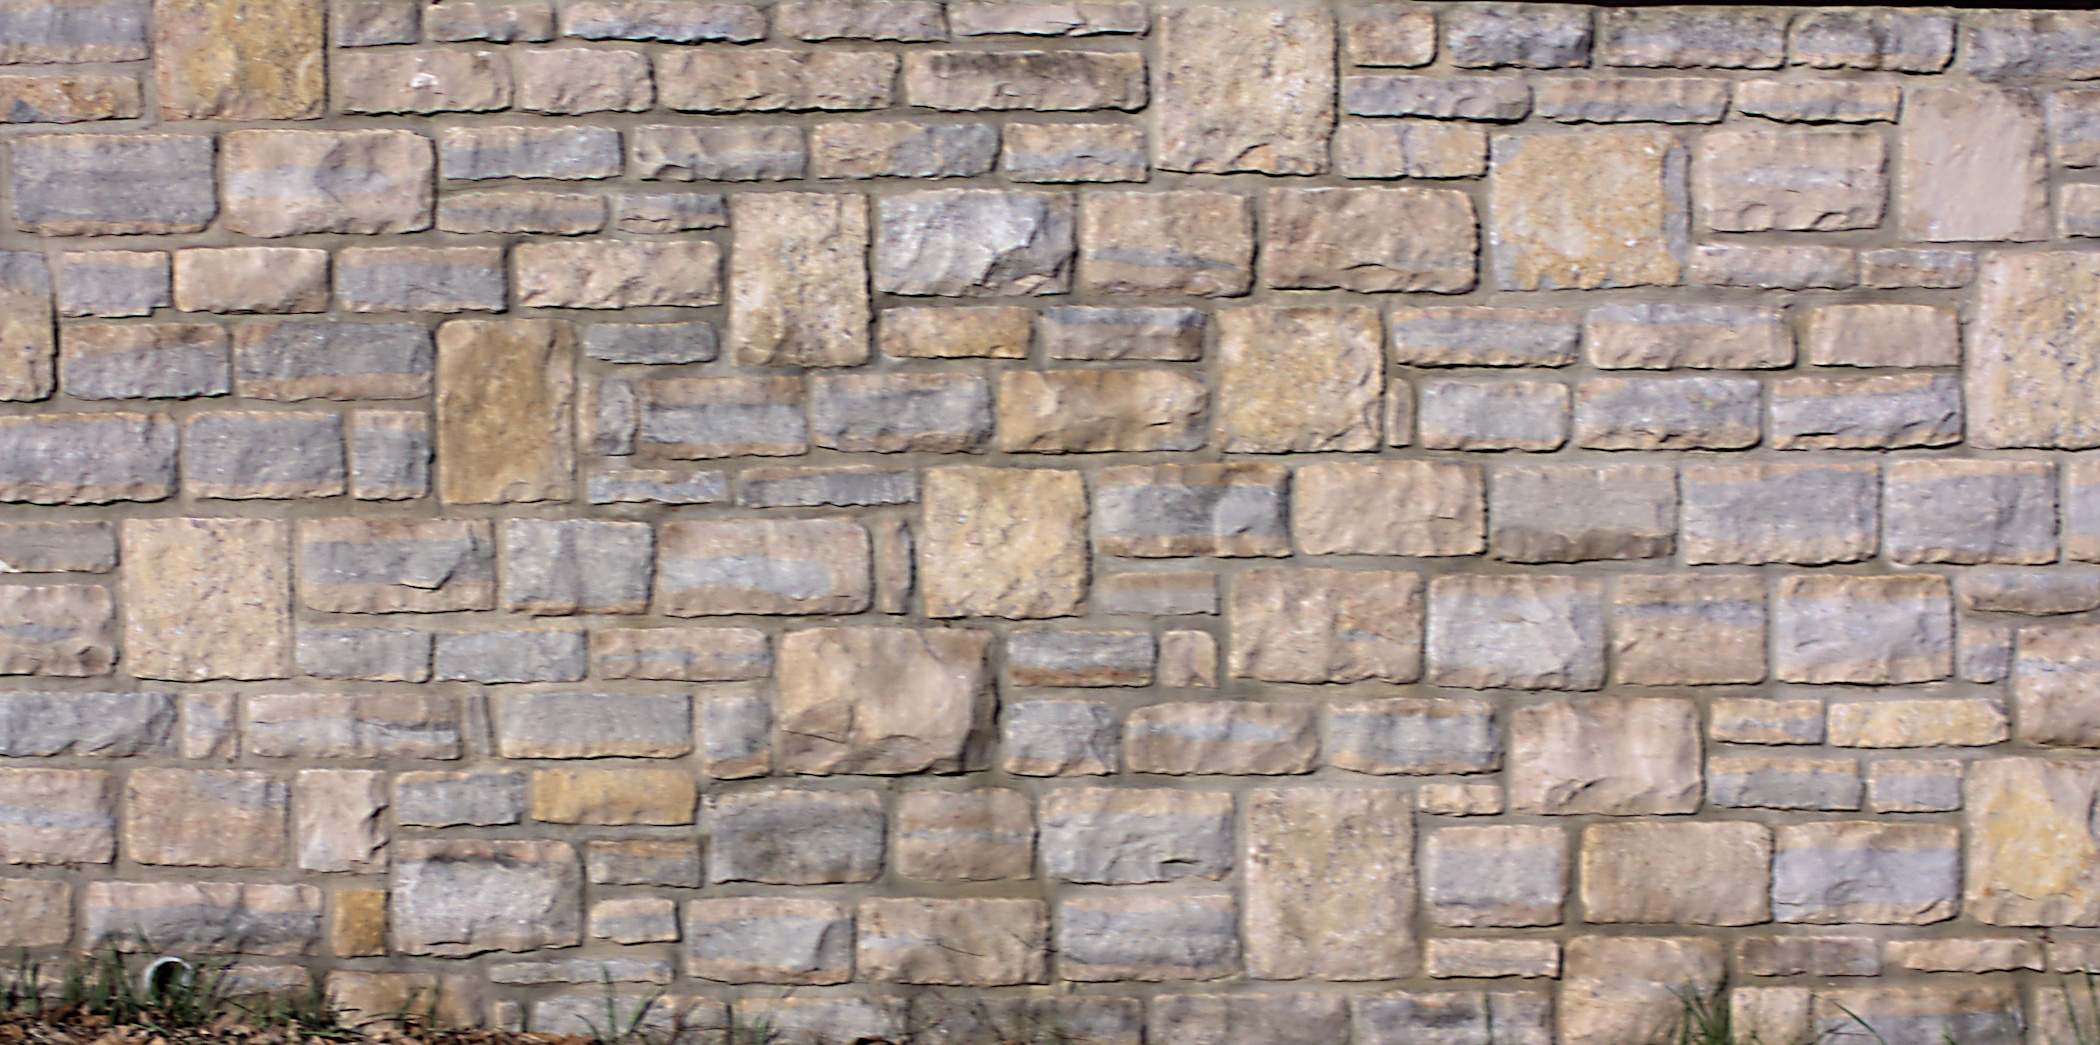 Related to Exterior Stone Designs Manufactured Stone Walls 2100x1045